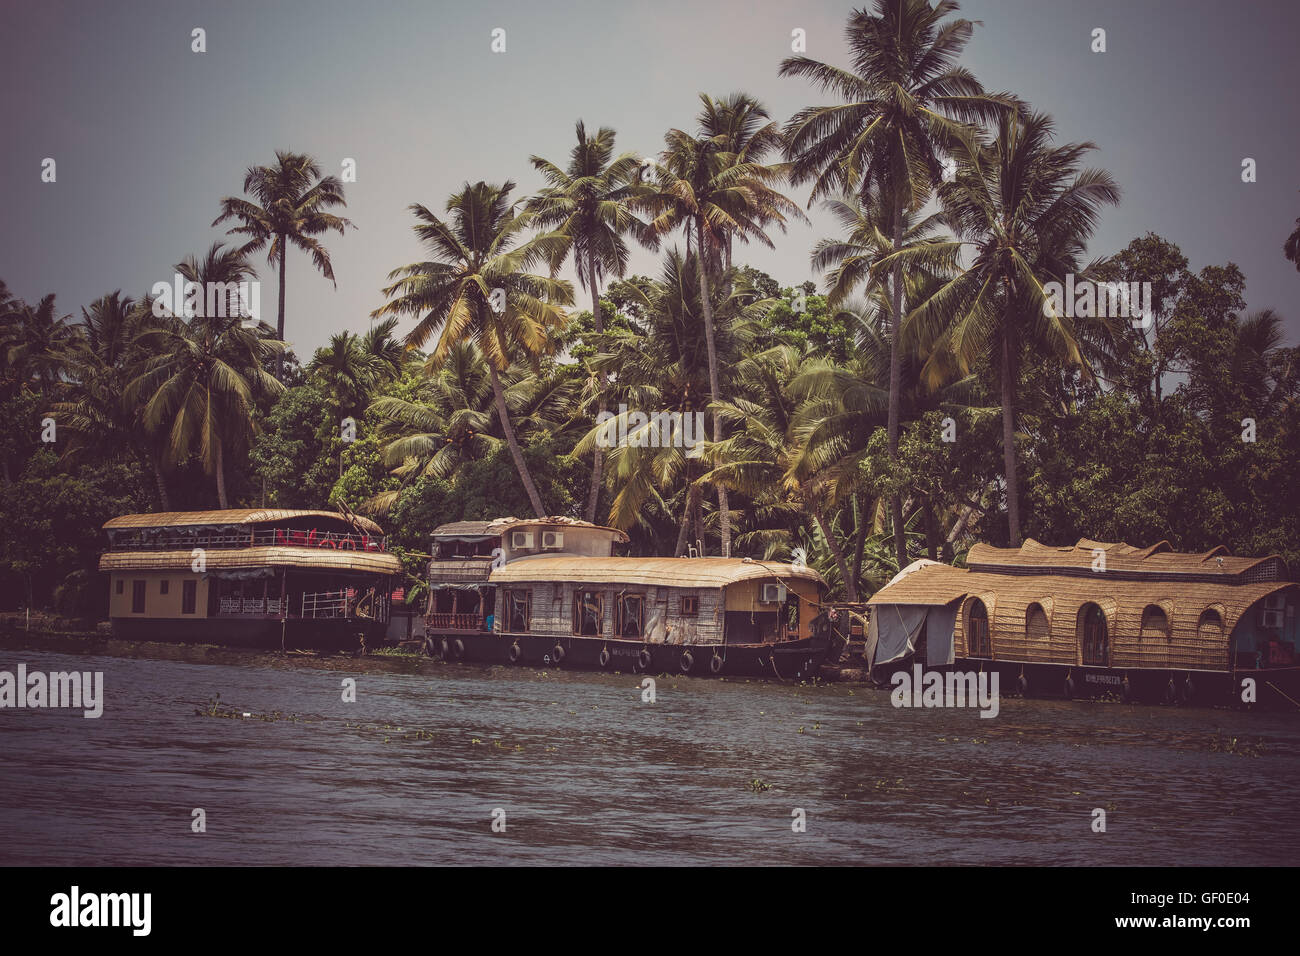 Allepey, Kerala, India, March 31, 2015: Backwaters boats. Channels on the river in the city of Allapuzha. Stock Photo